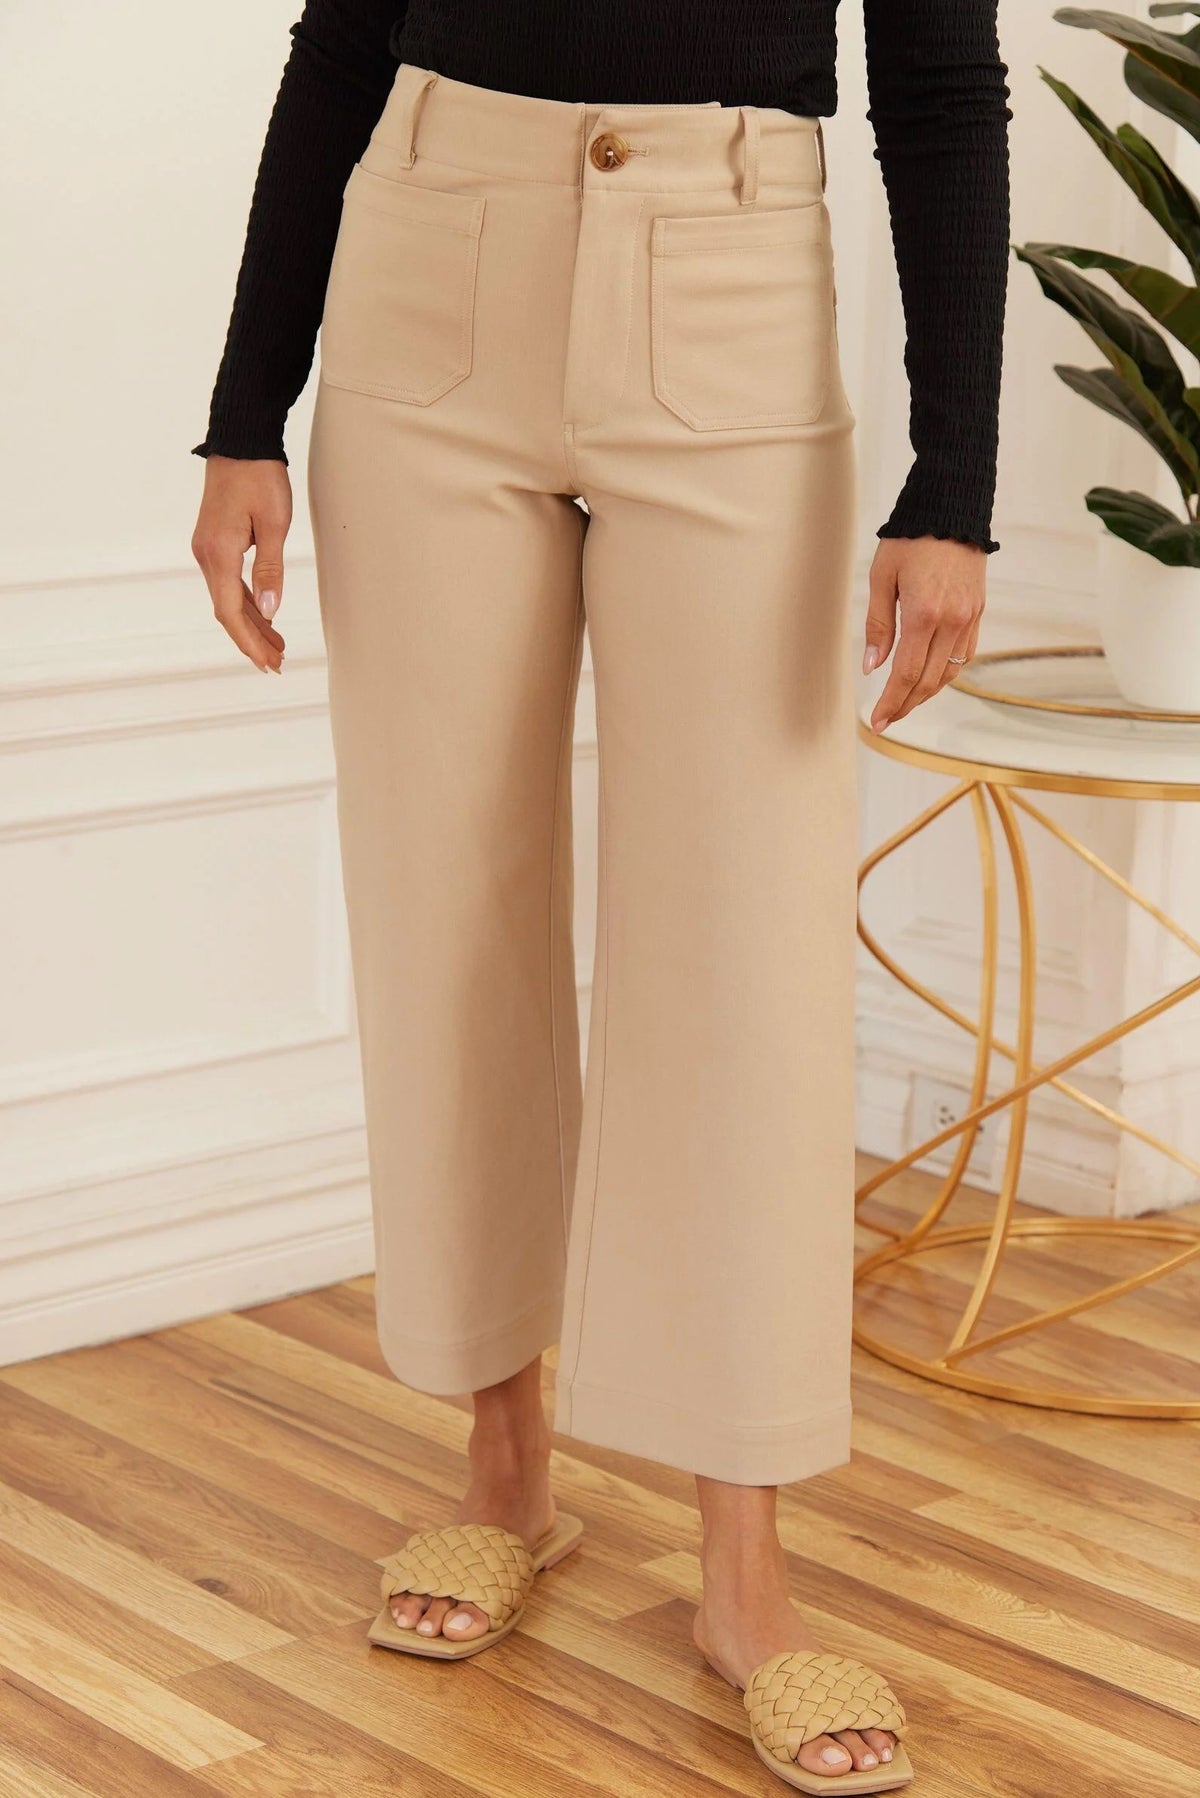 The Attic Boutique Hayley Cropped Taupe Pant Bottoms - The Attic Boutique